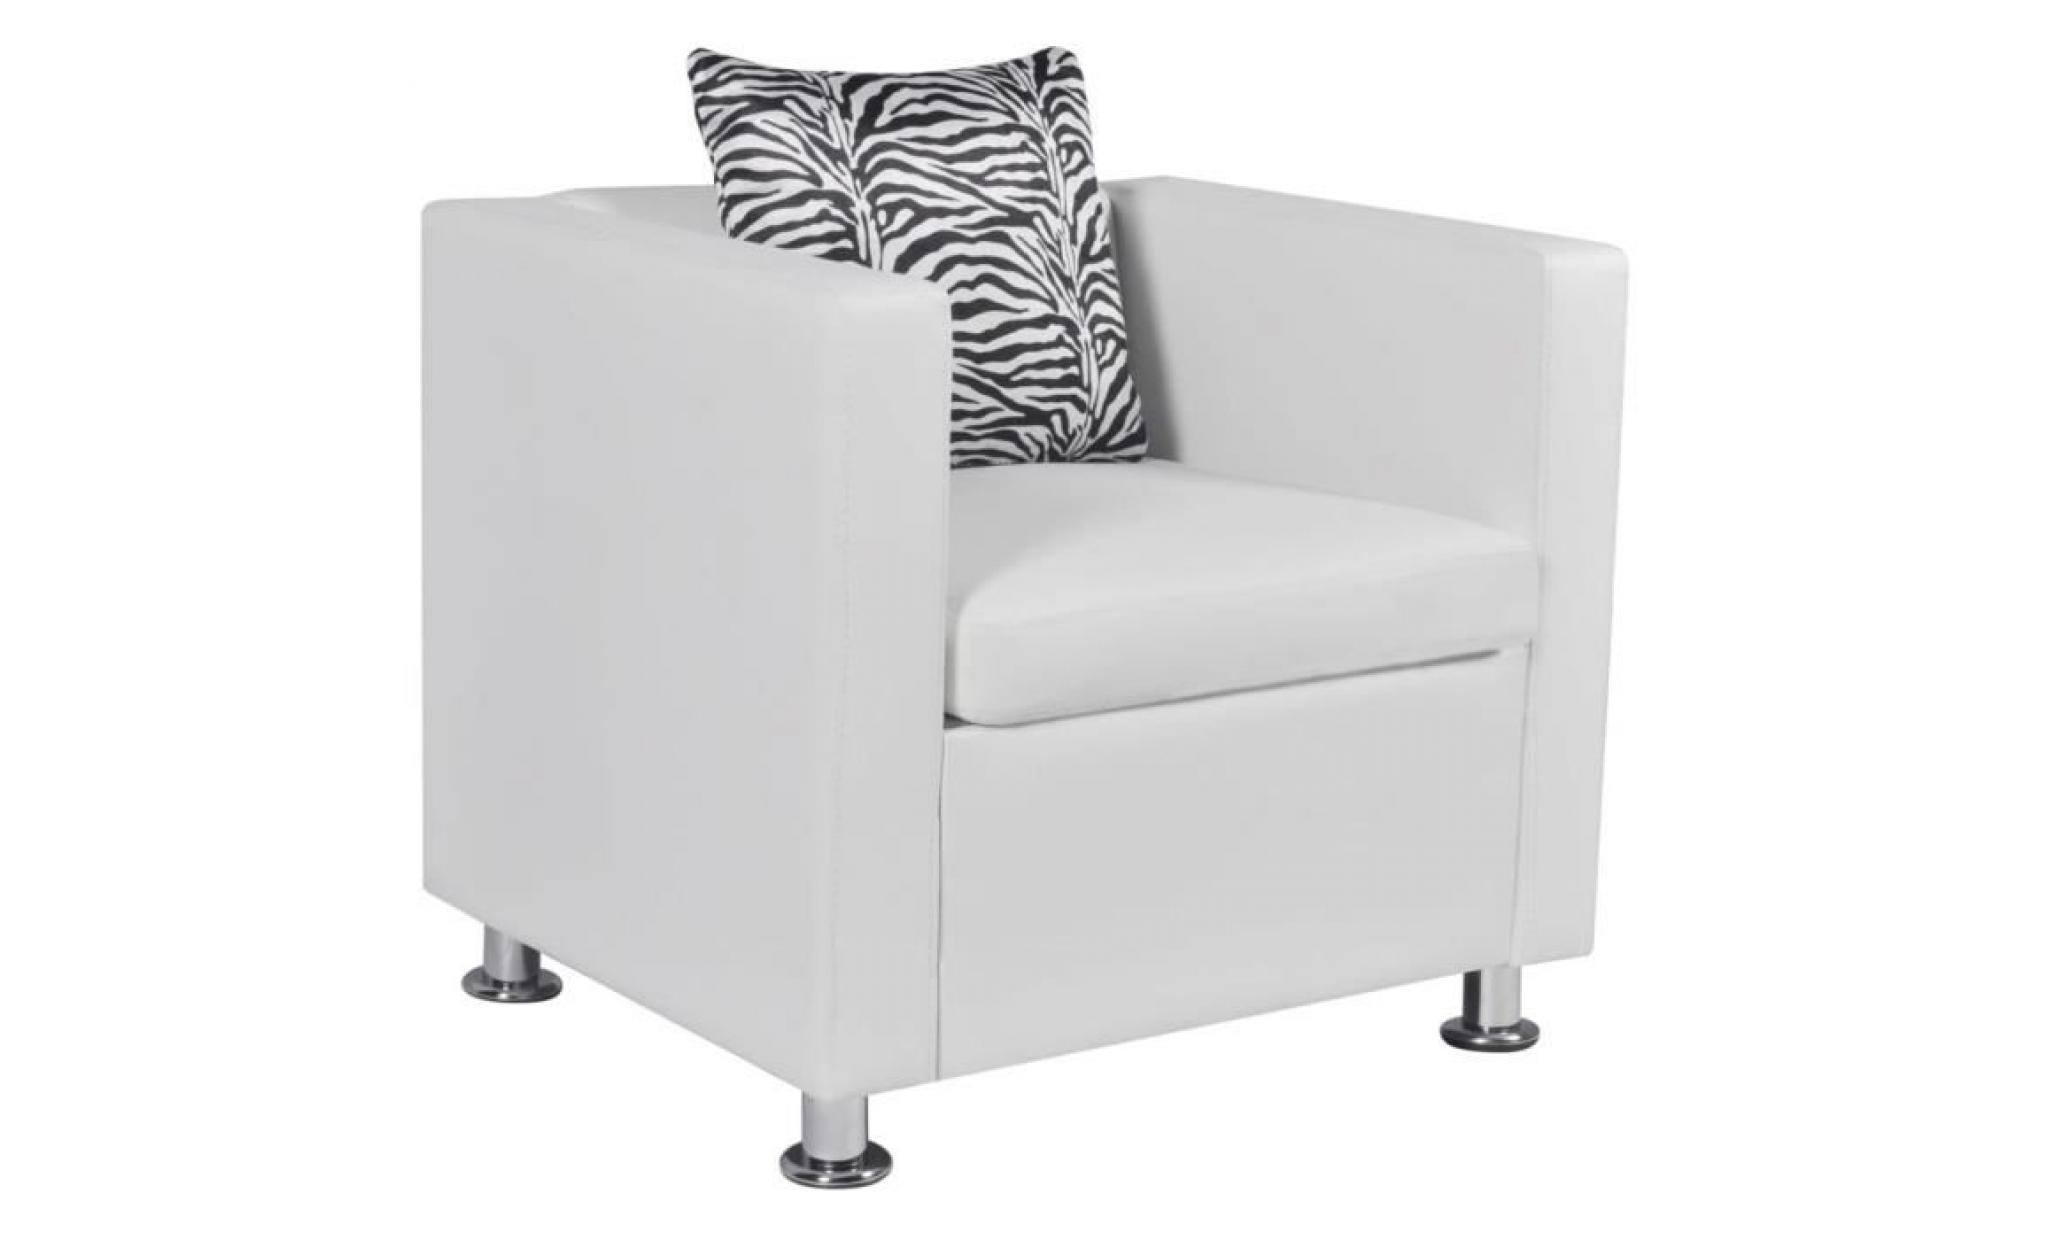 fauteuil cuir synthétique blanc fauteuil scandinave fauteuil relaxation